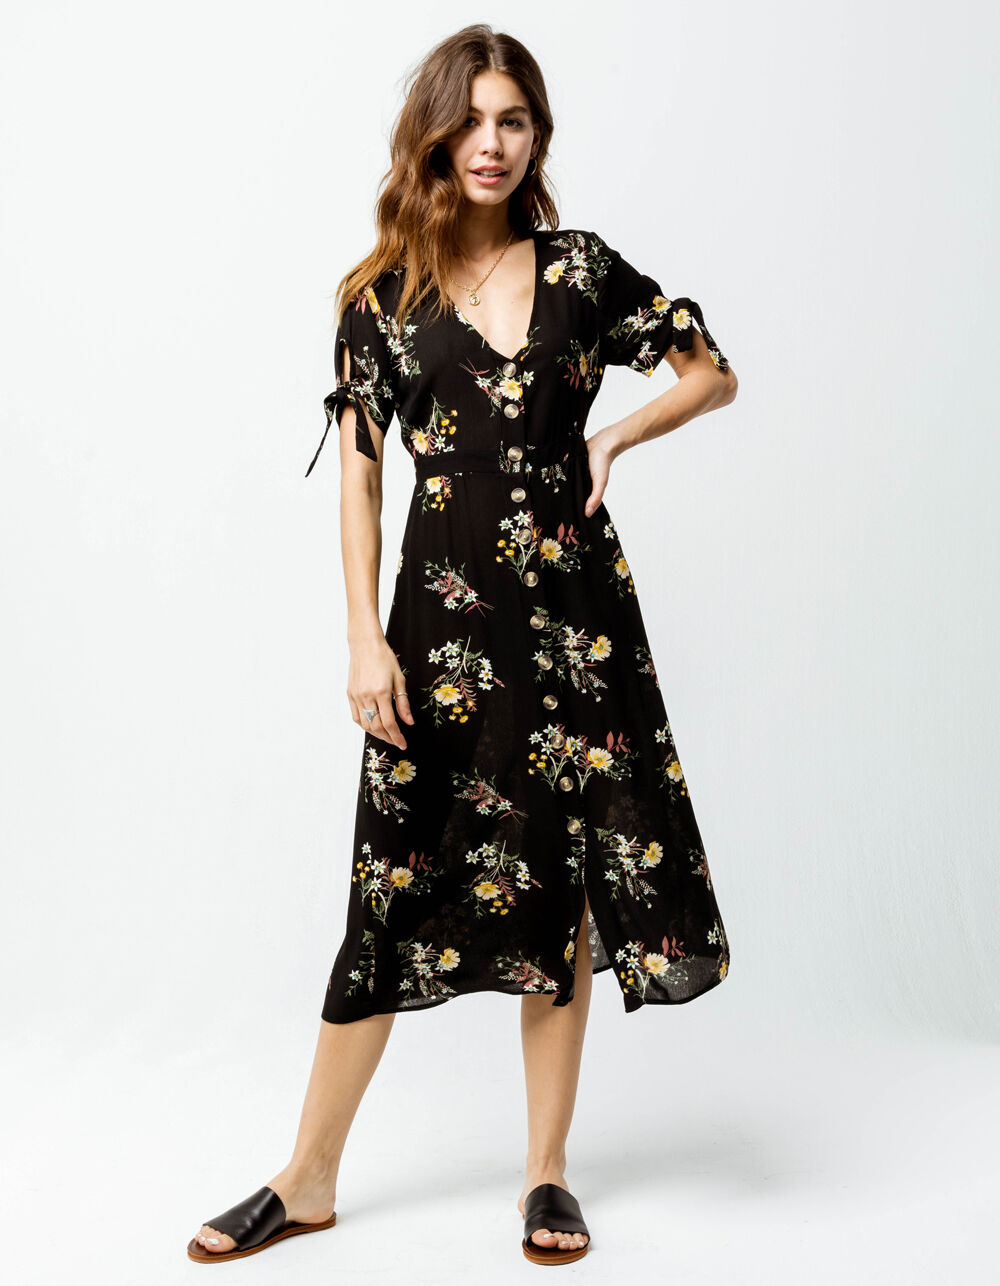 SKY AND SPARROW Vine Tie Sleeve Button Front Maxi Dress - BLACK COMBO ...